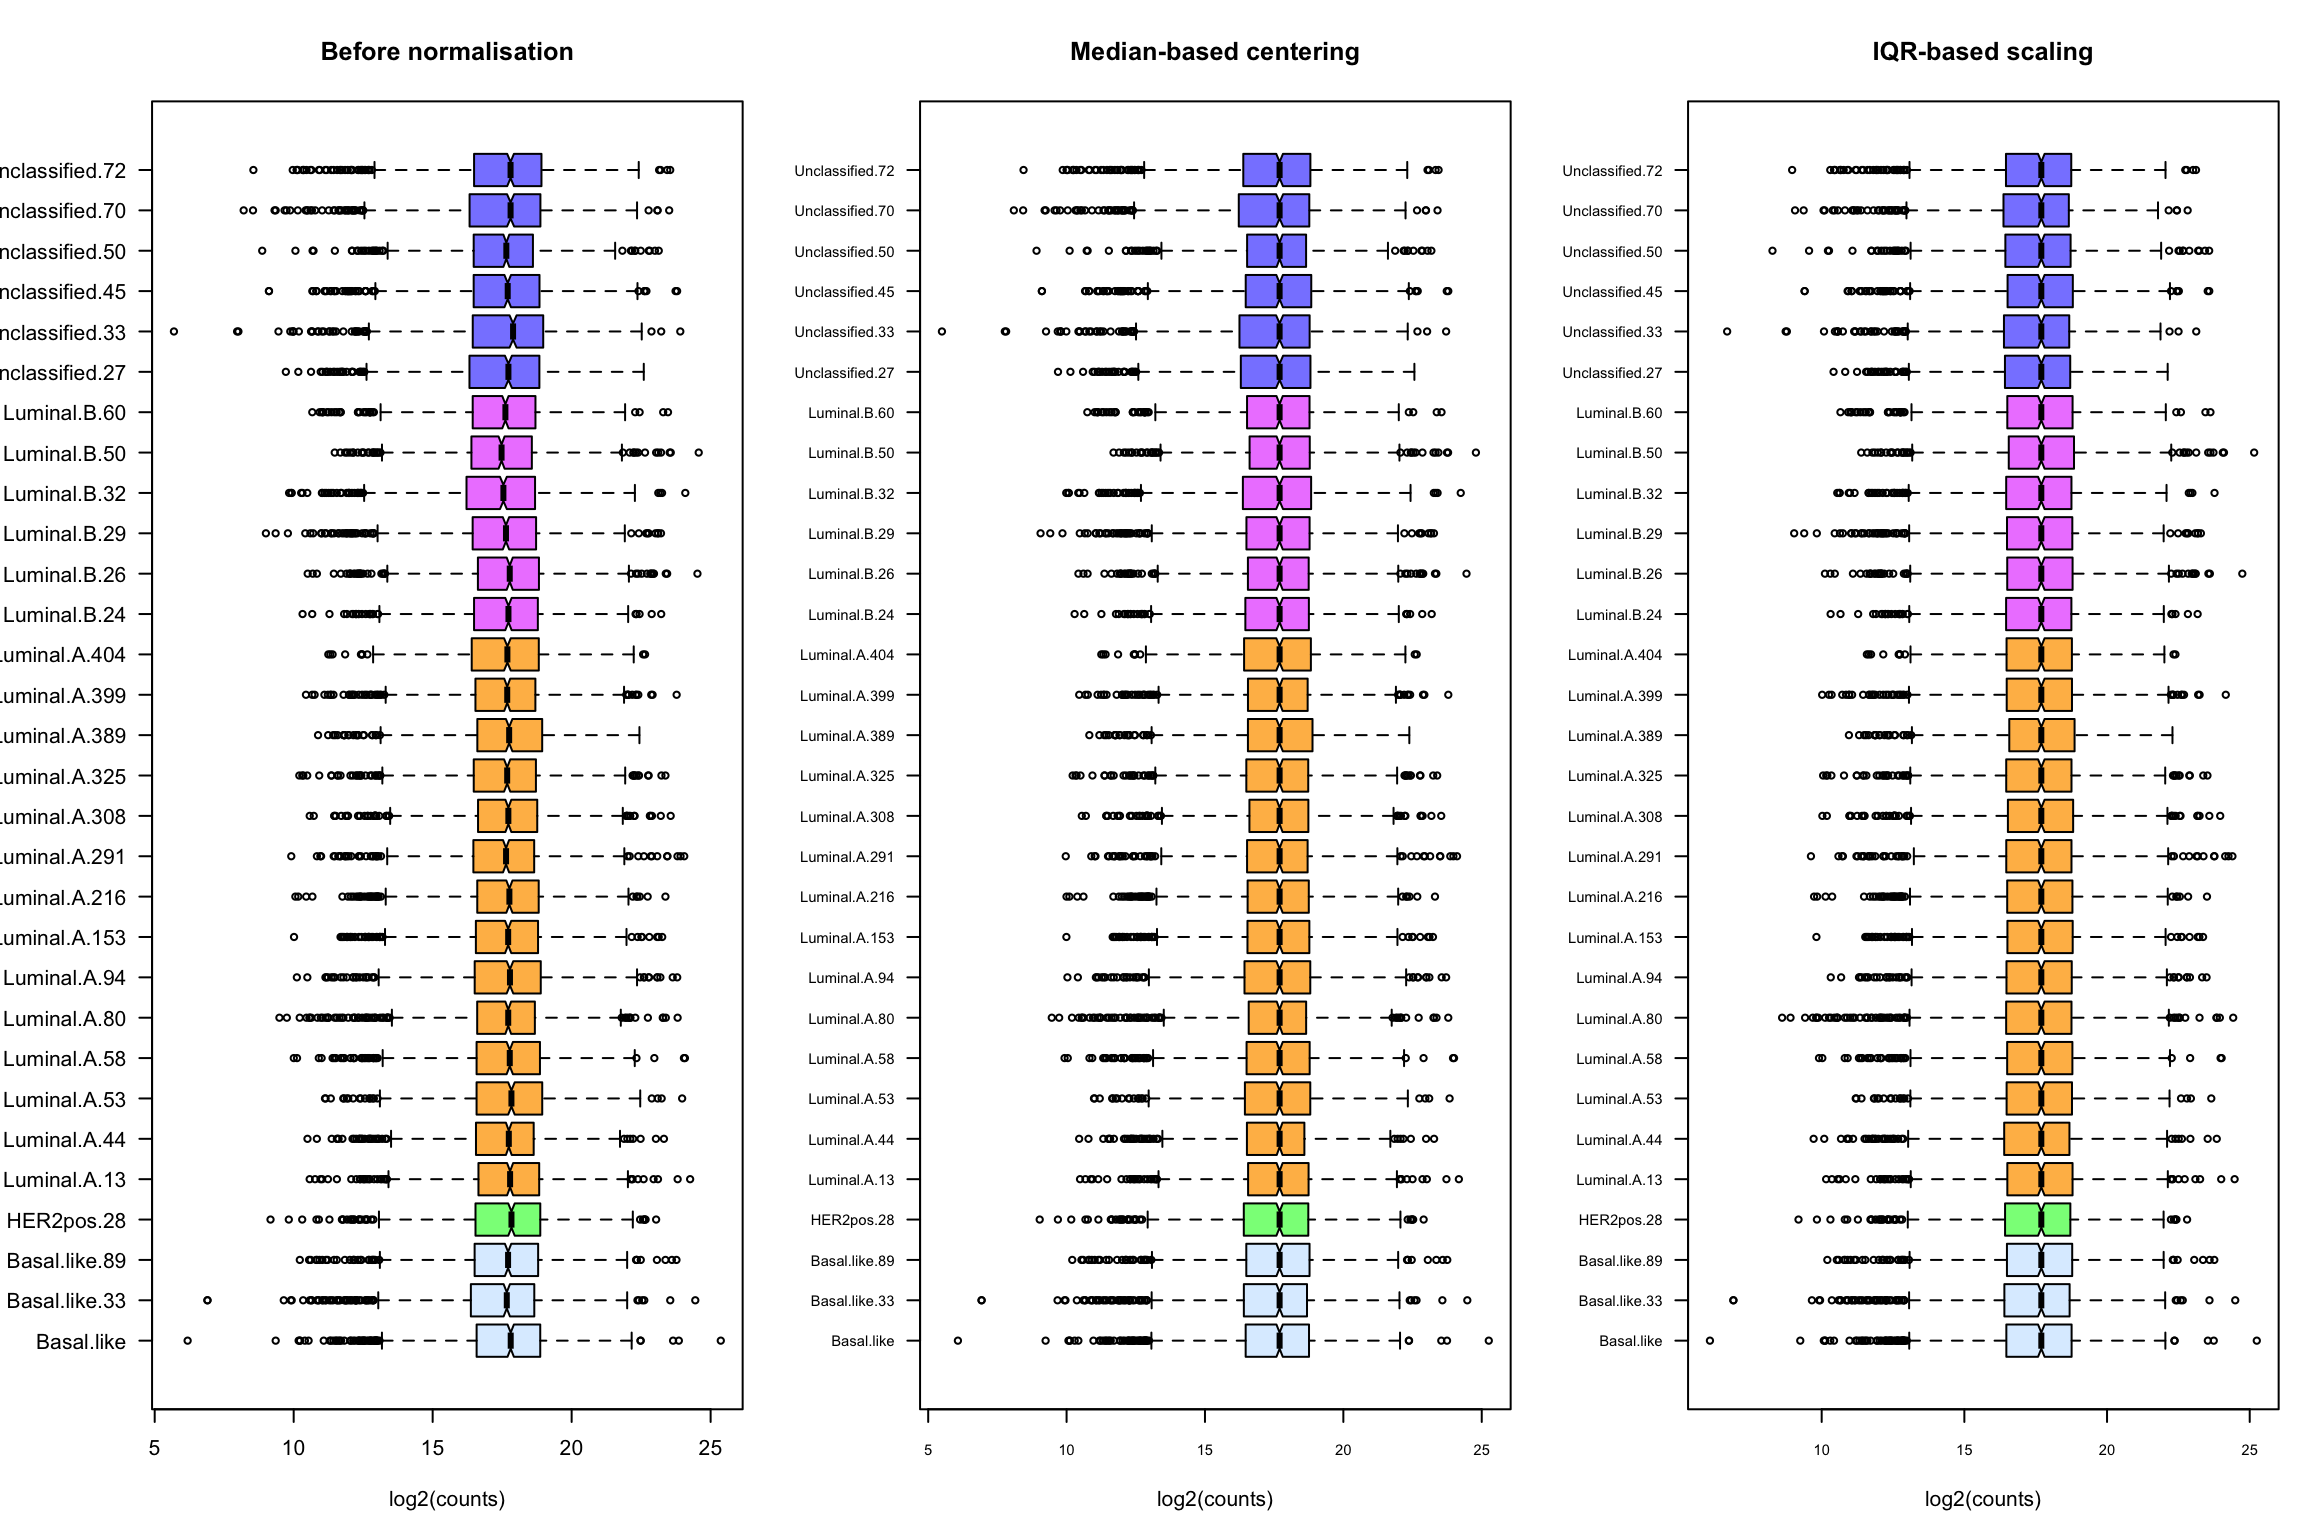 Box plot of a random selection of samples from the TCGA-BIC transcriptome dataset. 